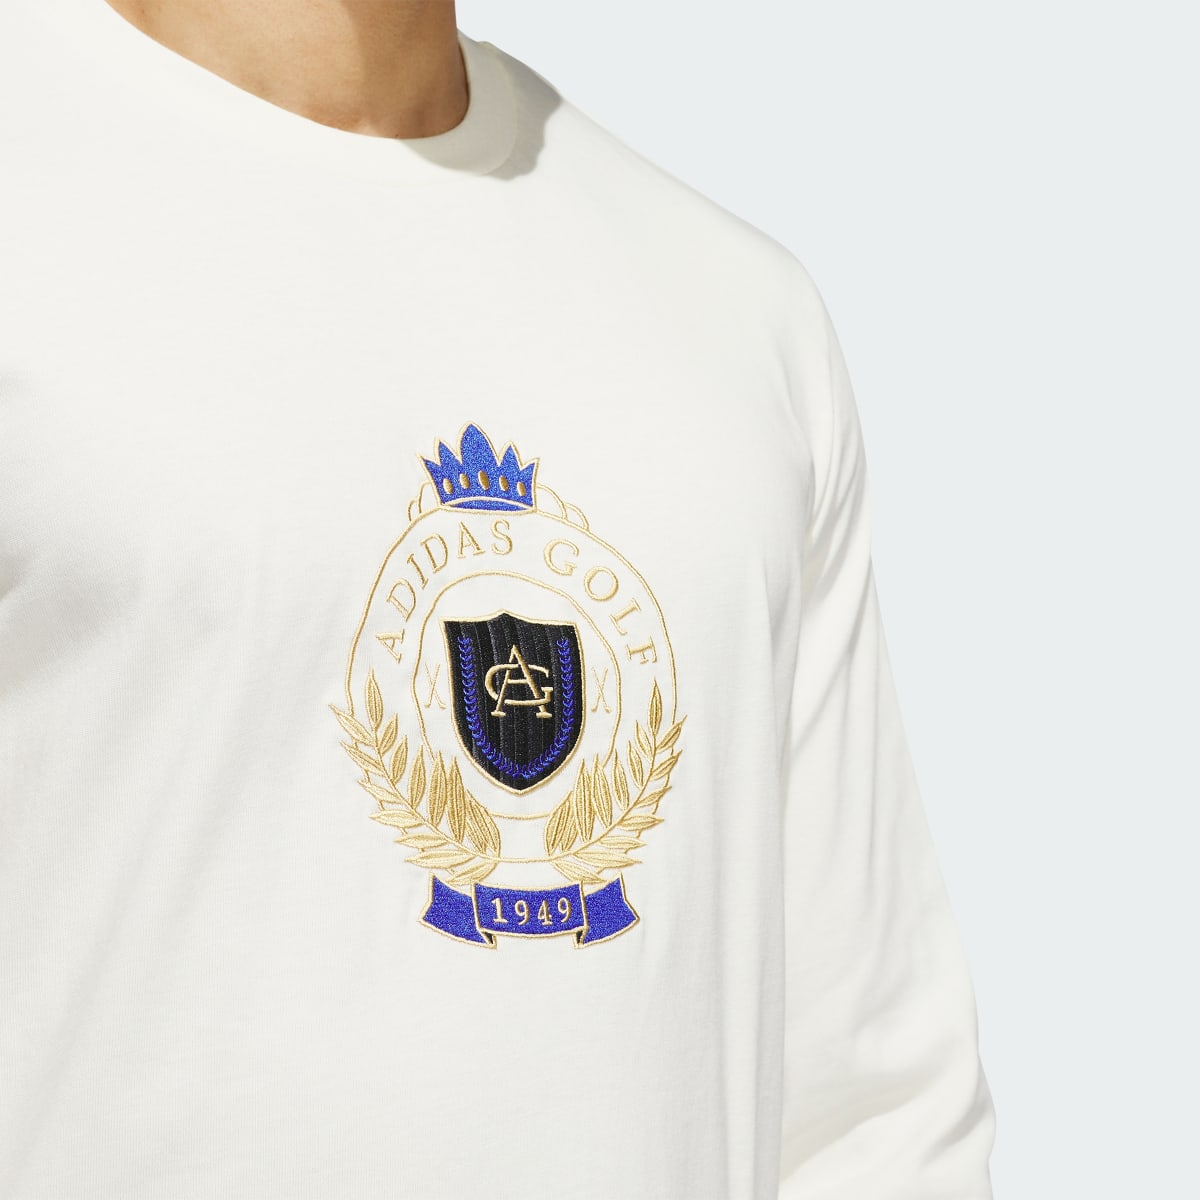 Adidas Go-To Crest Graphic Longsleeve. 6